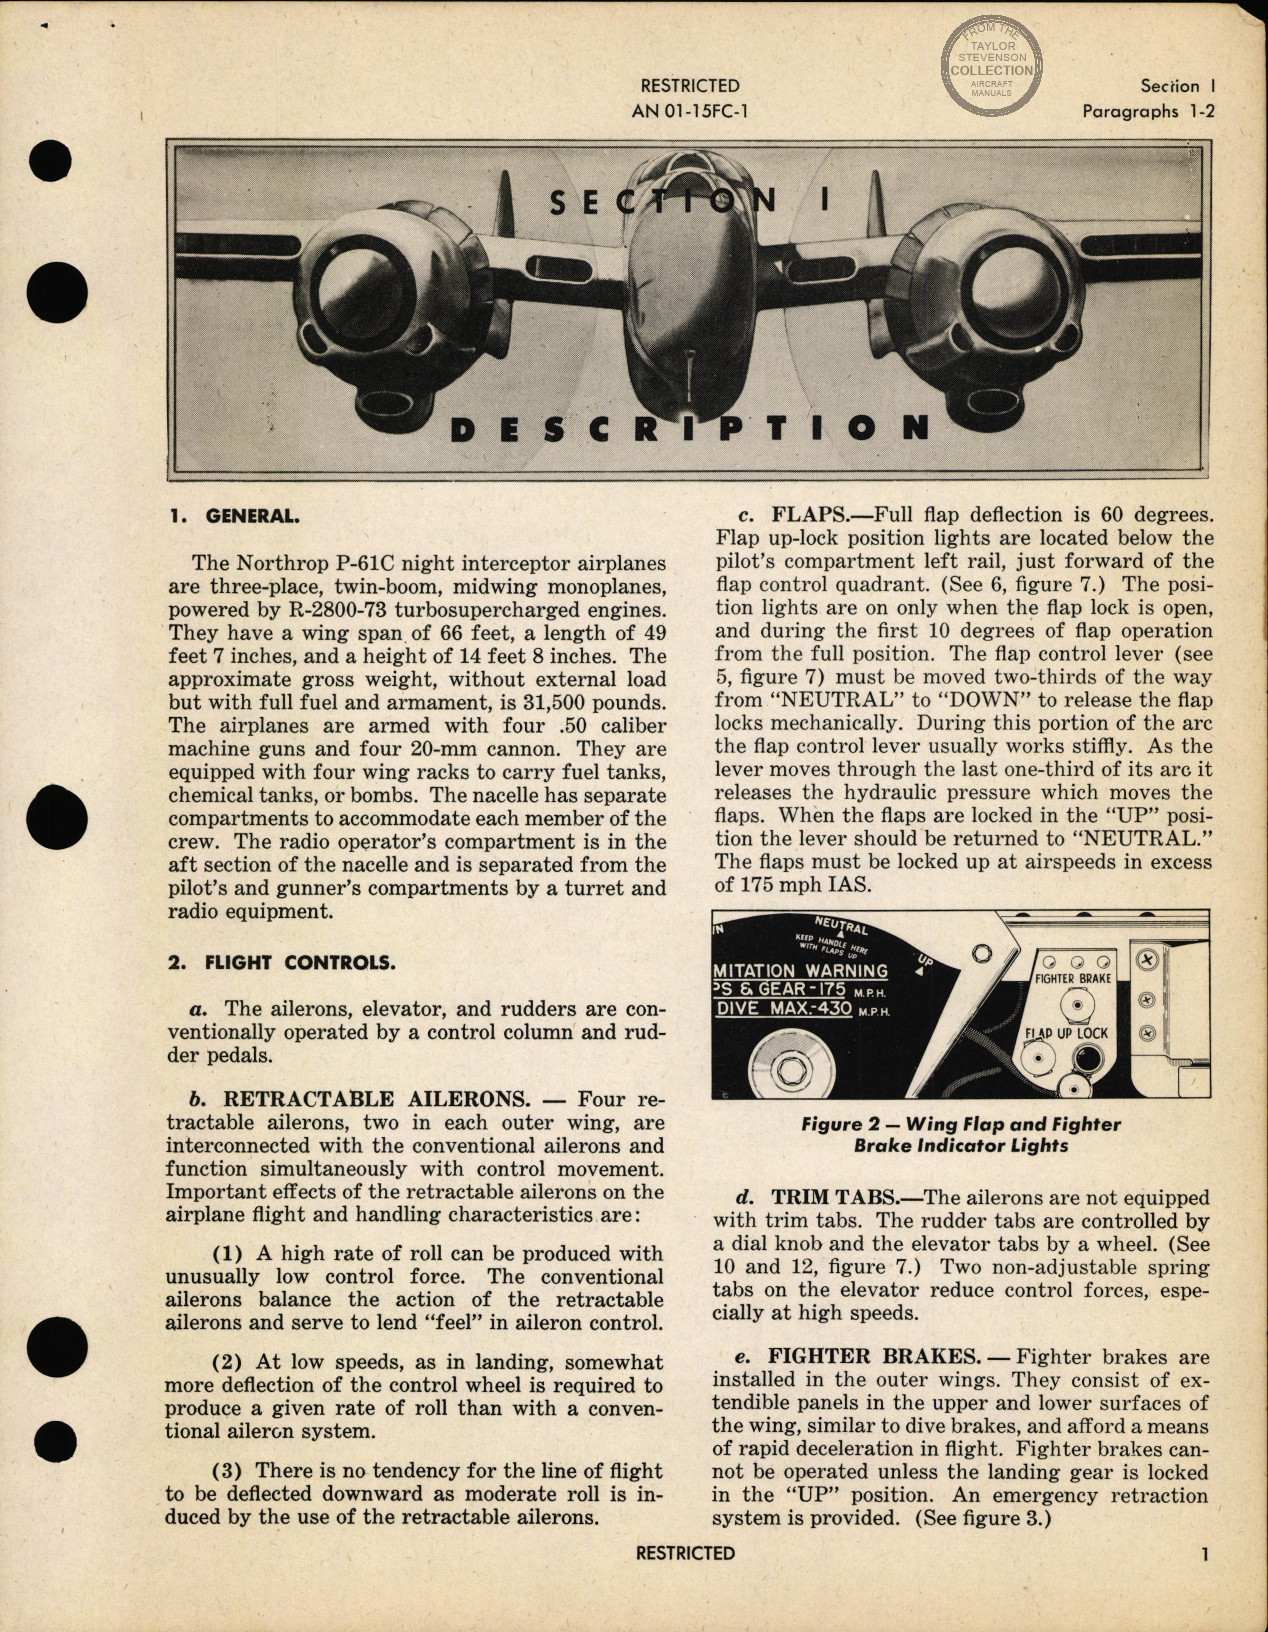 Sample page 5 from AirCorps Library document: Pilot's Flight Operating Instructions for Army Model P-61C